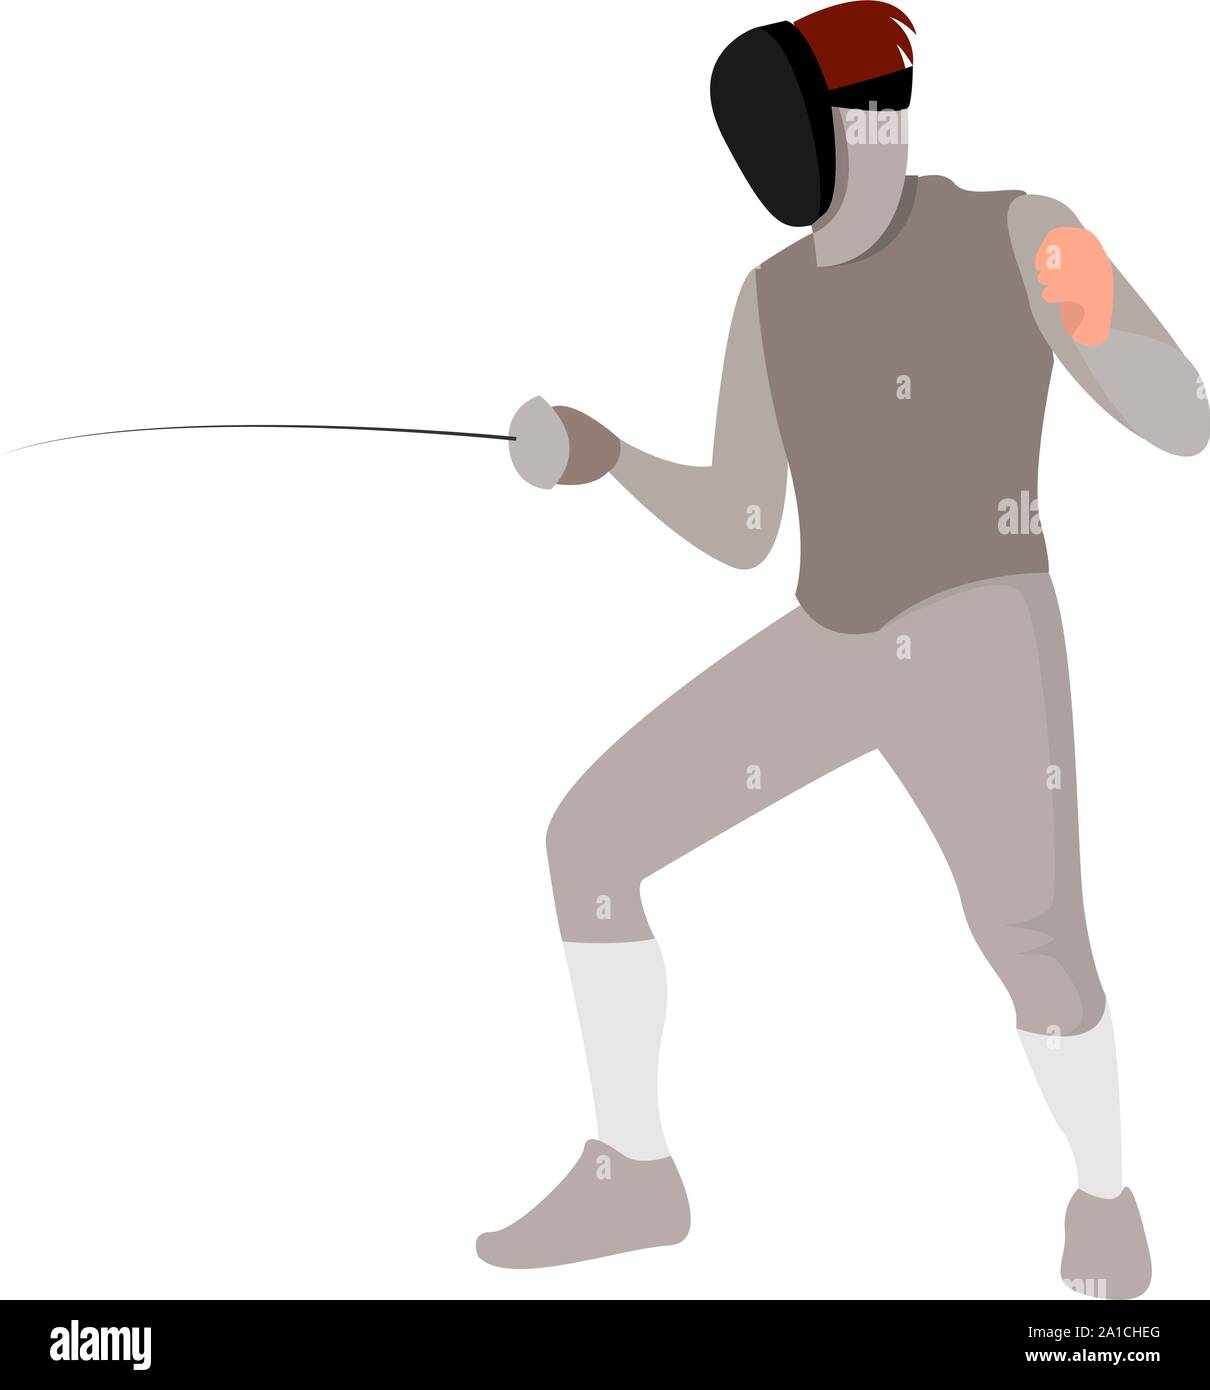 Fencing, illustration, vector on white background. Stock Vector